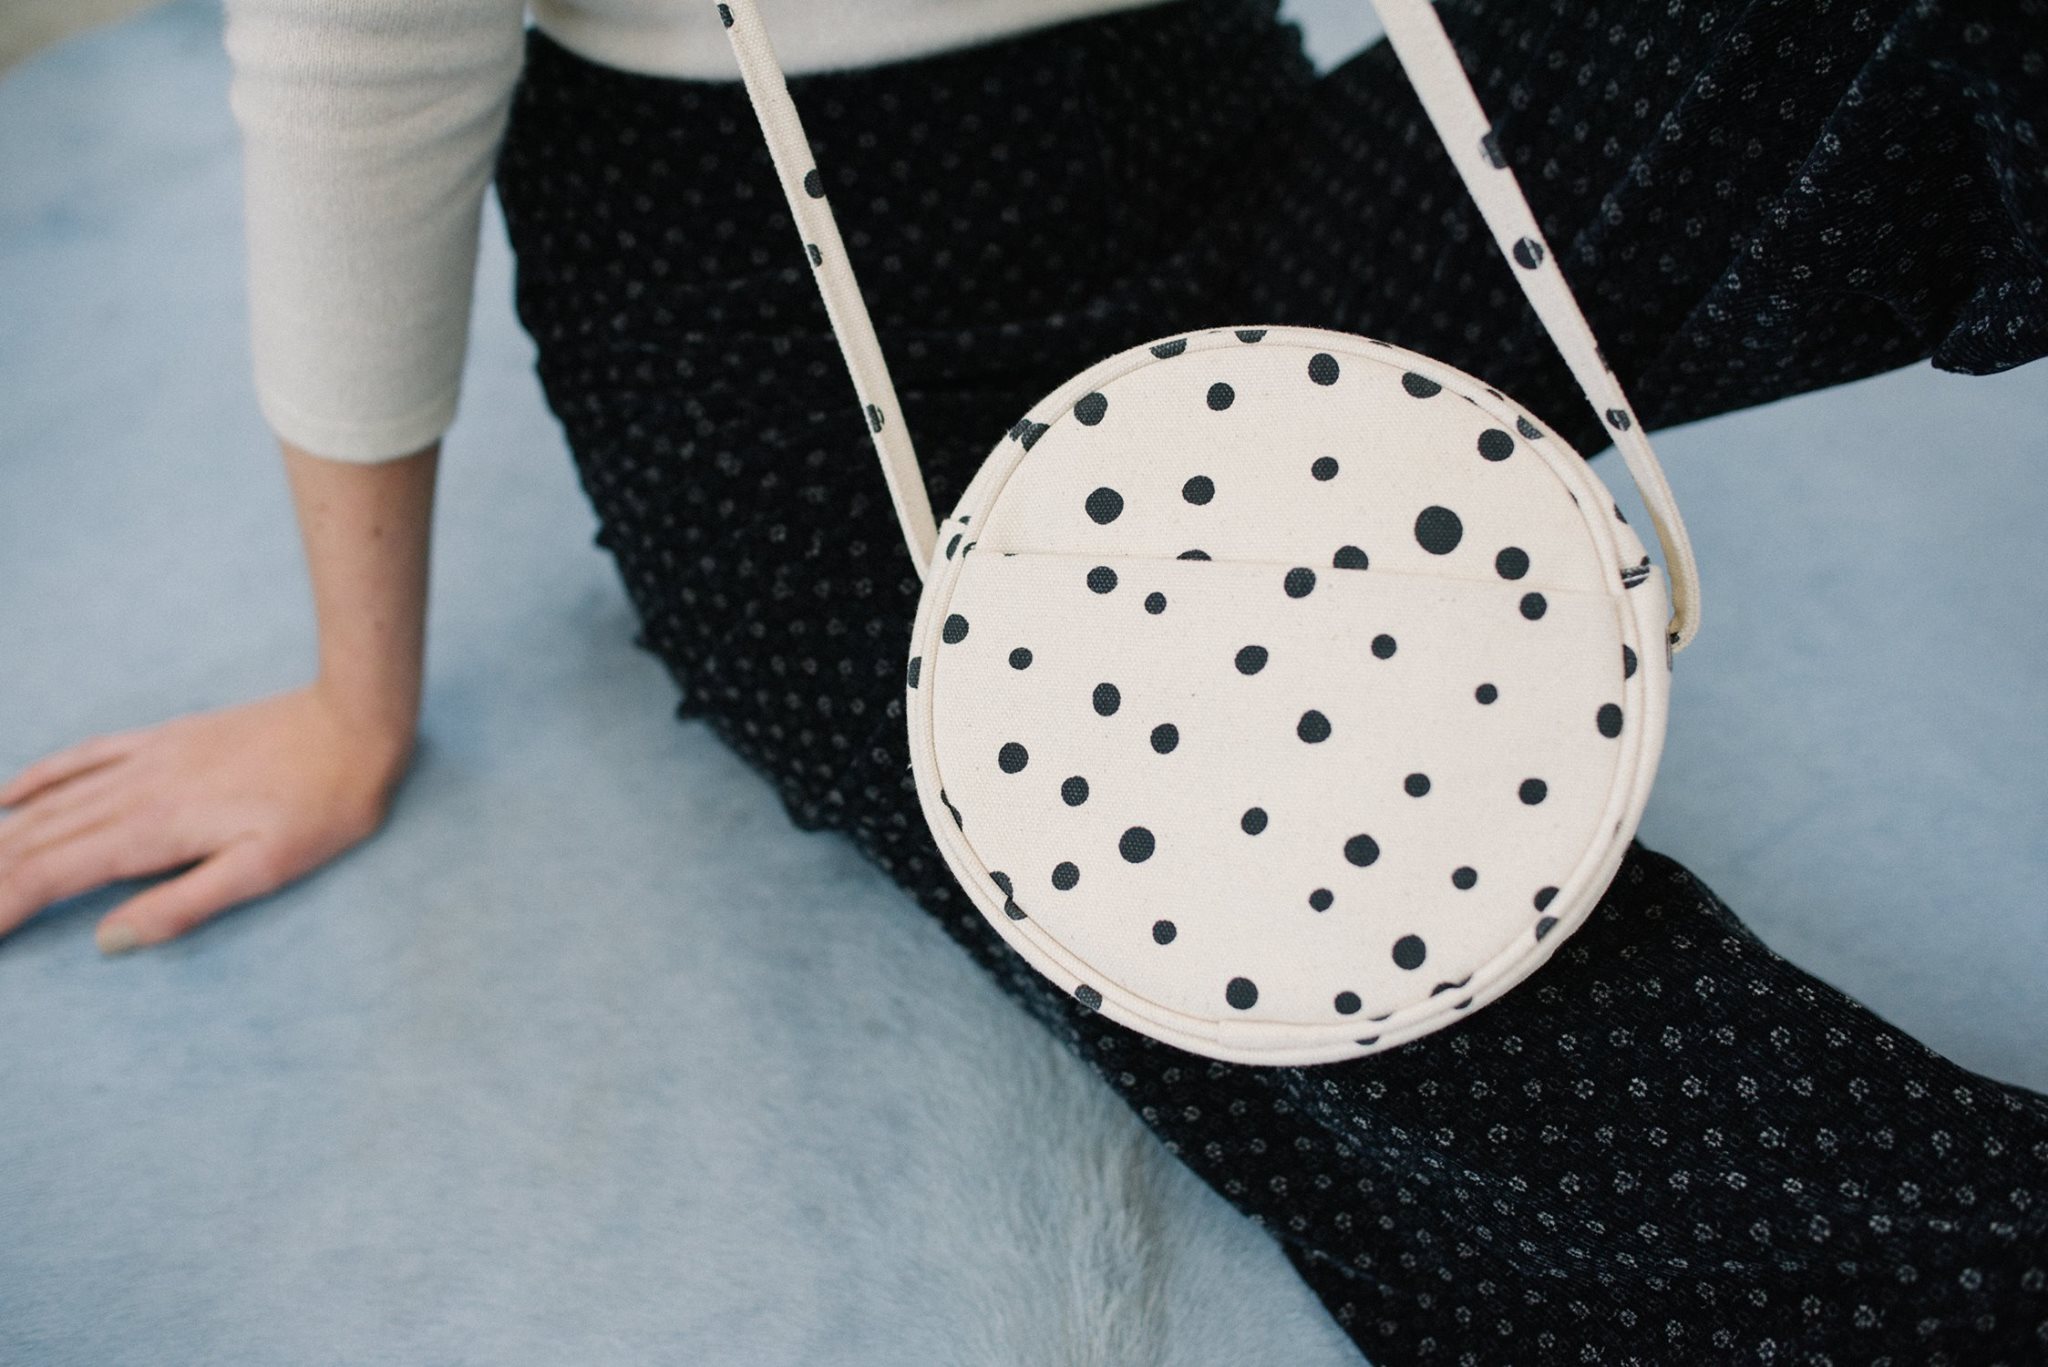    Baggu    The brand may be known for its namesake&nbsp; ripstop nylon shopping bags—which hold 2-3 times as much as a traditional grocery bag—but Baggu sells a variety of canvas, leather, and nylon bags that are both cute and functional. You  could